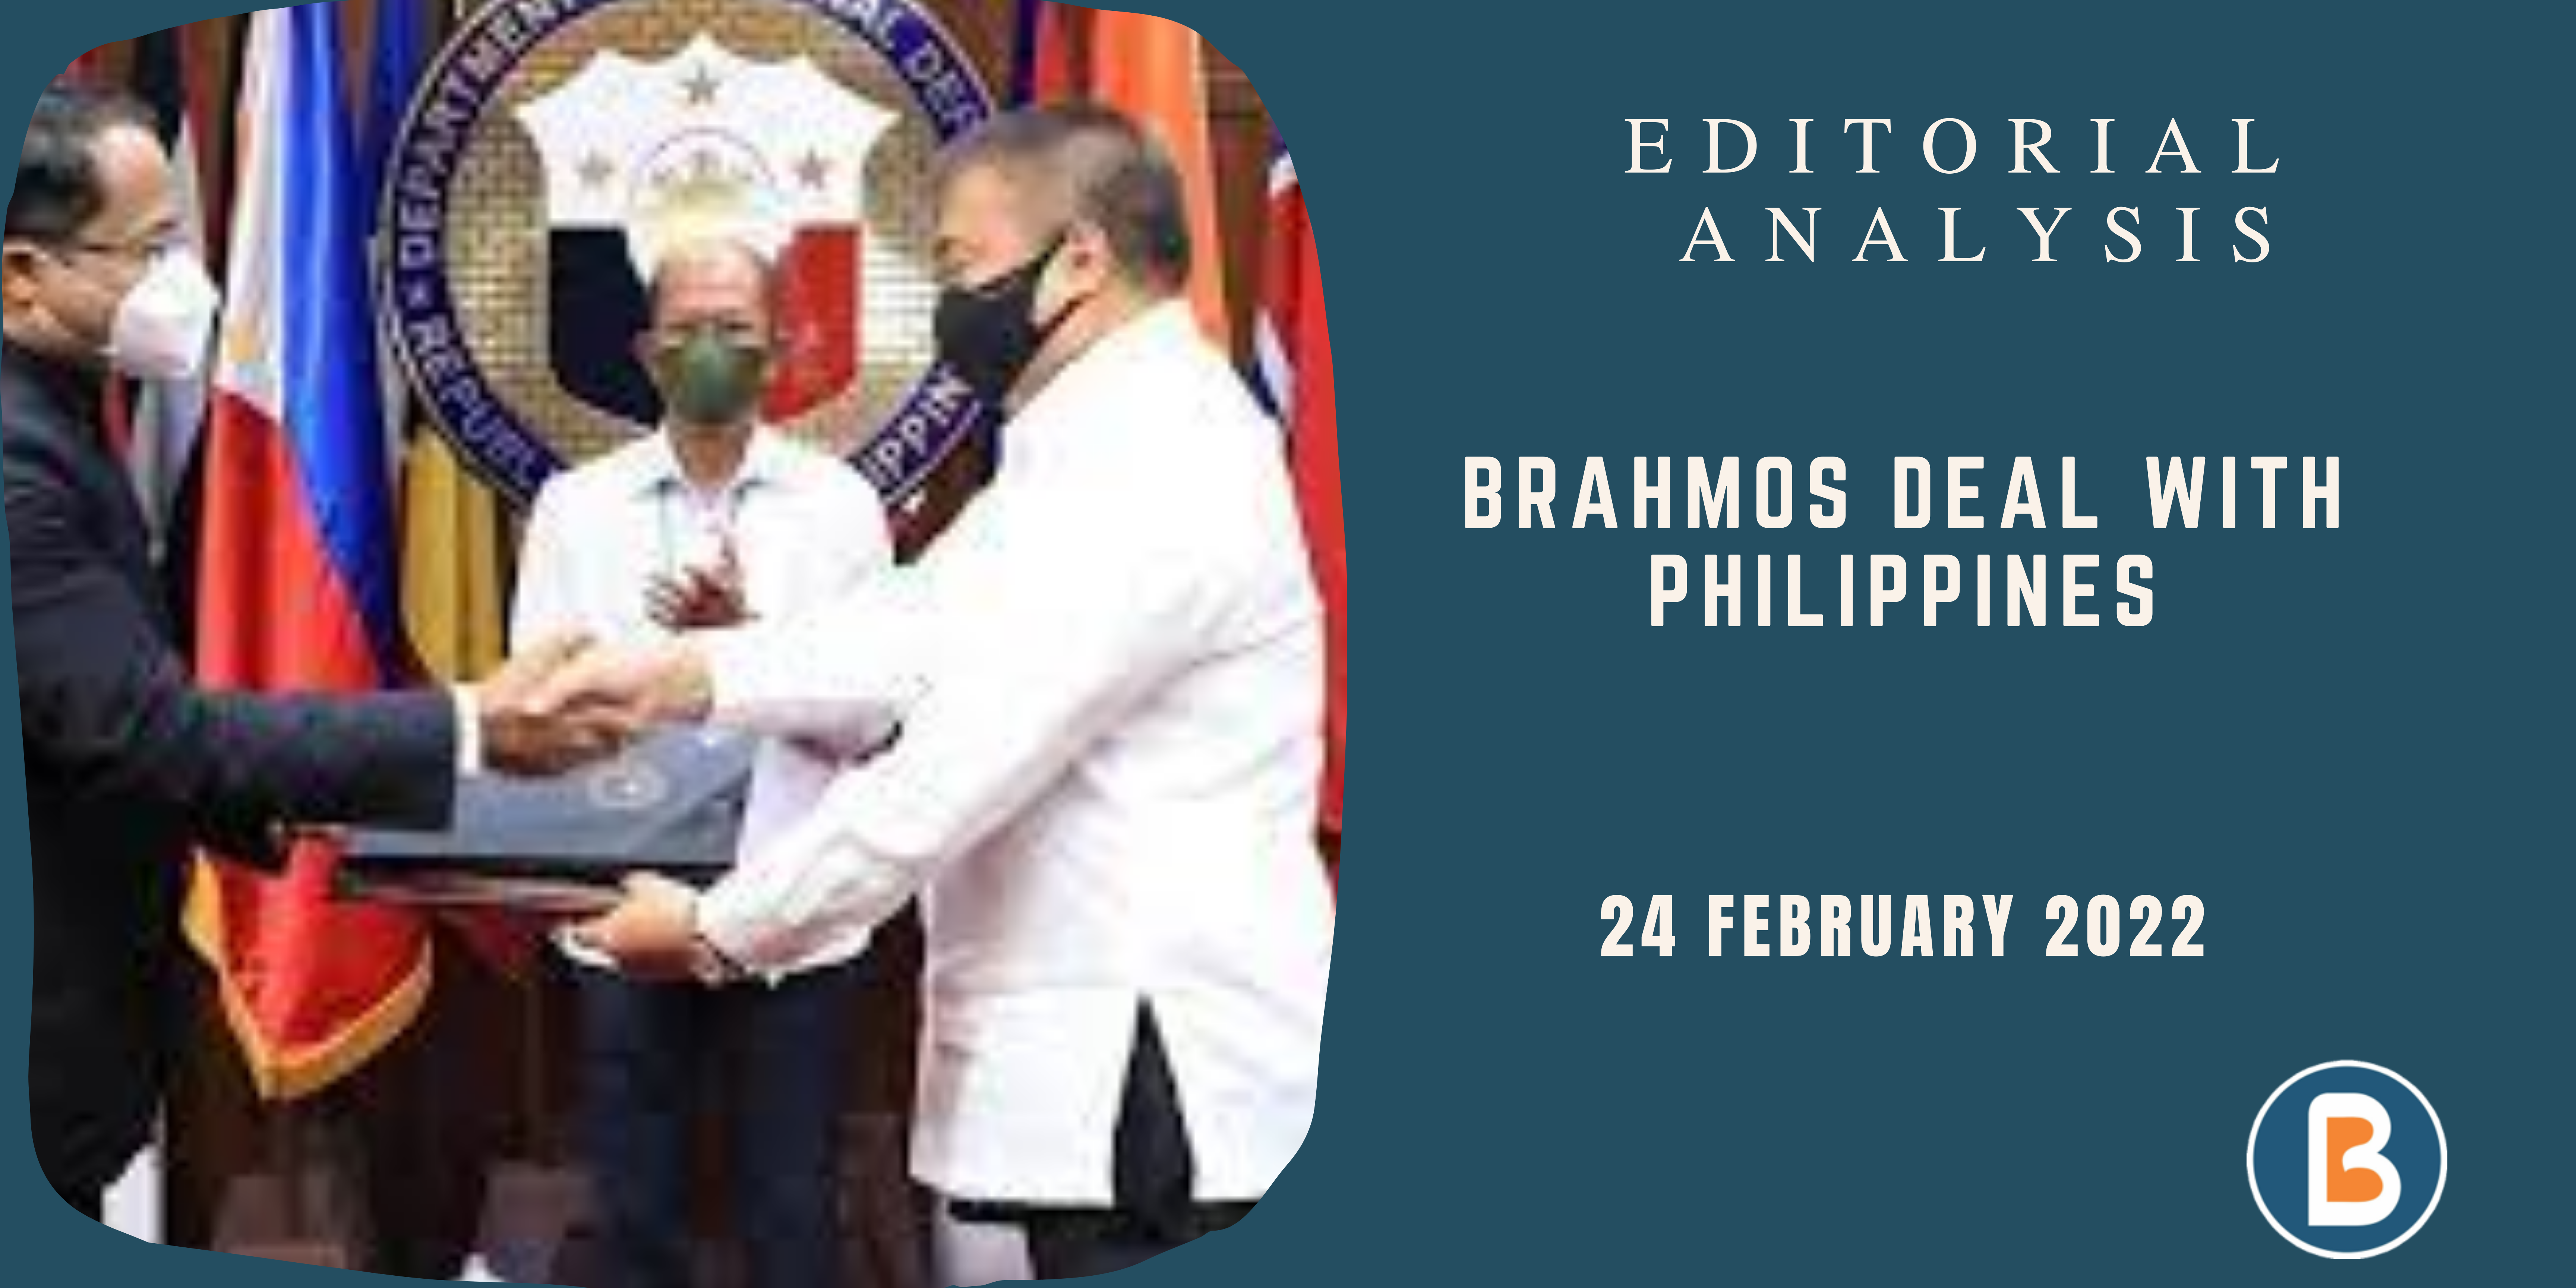 Editorial Analysis for IAS - Brahmos Deal With Philippines